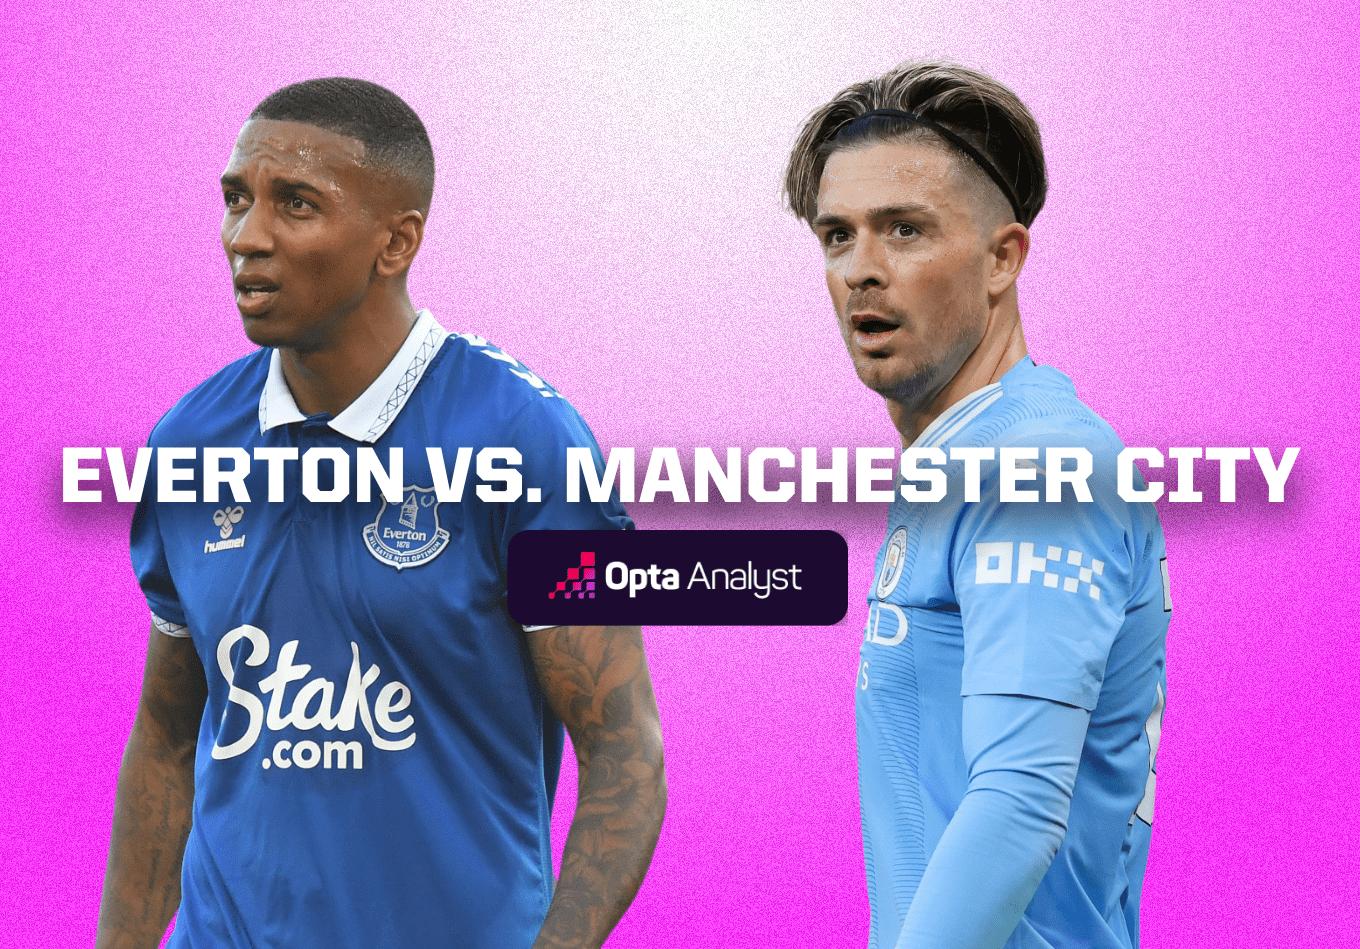 Everton vs Manchester City: Prediction and Preview